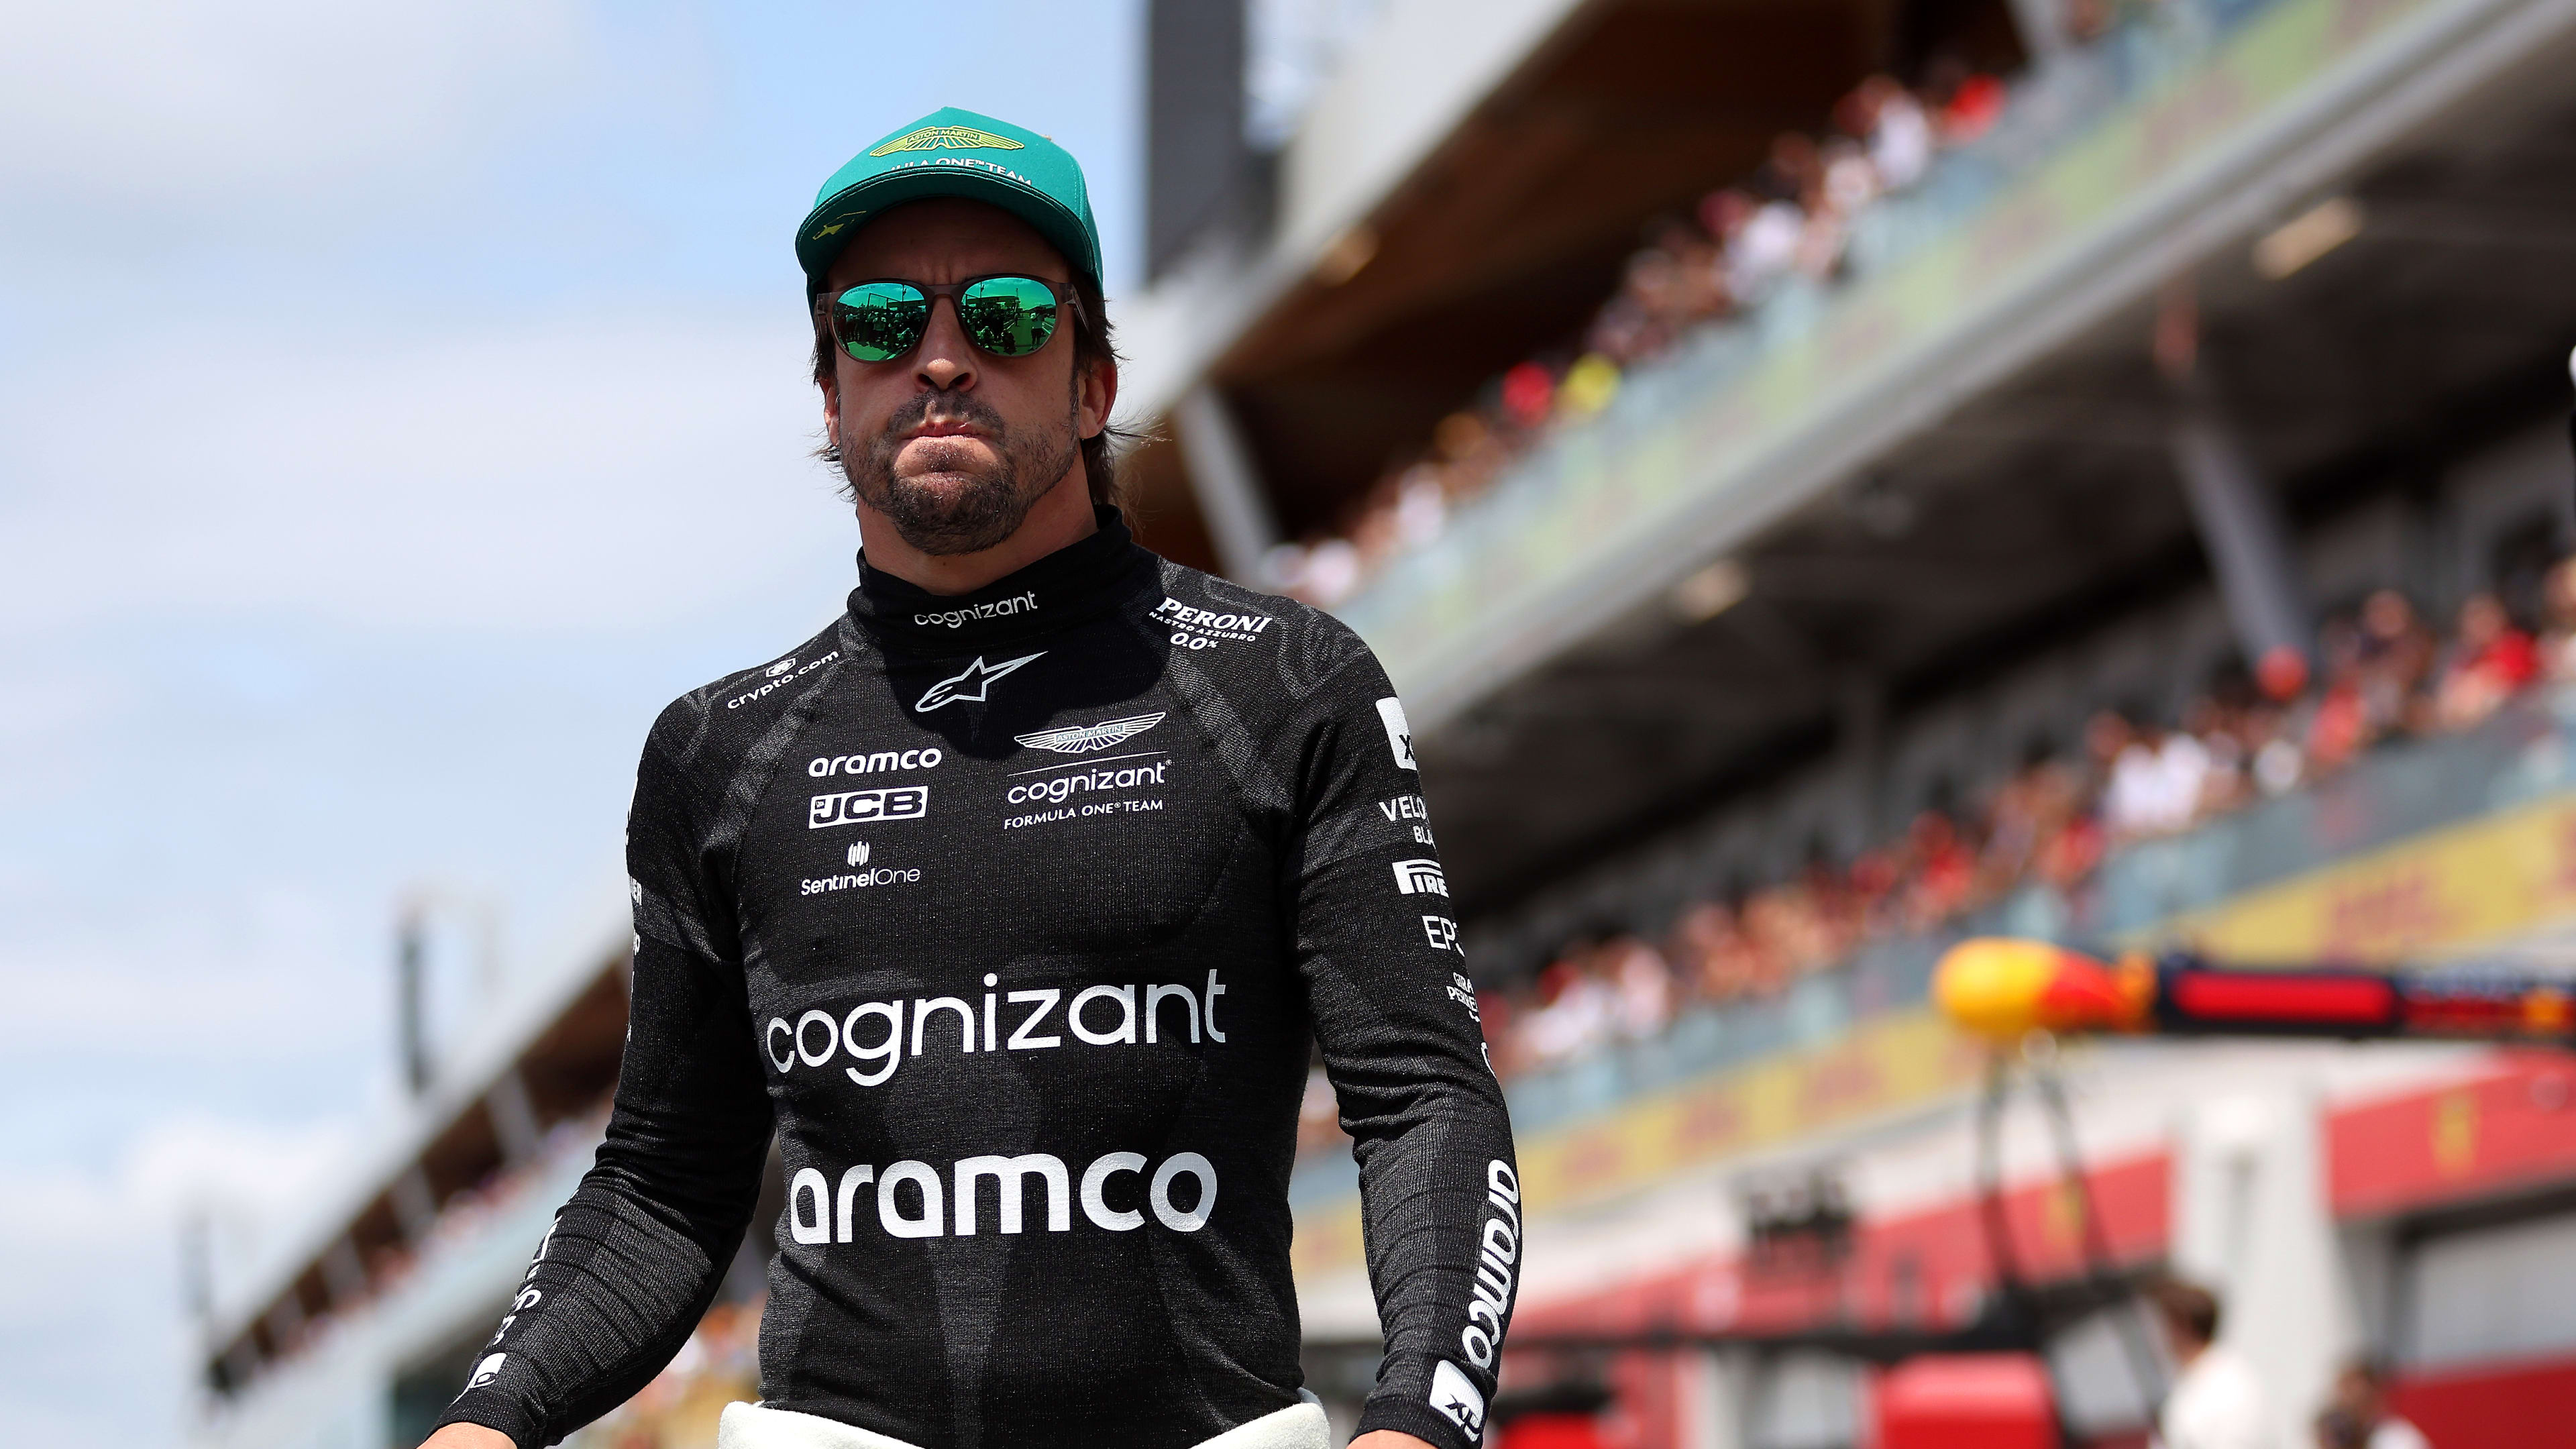 Alonso expects Aston Martin to have 'a little bit more pace' in Austria  after return to podium in Canada